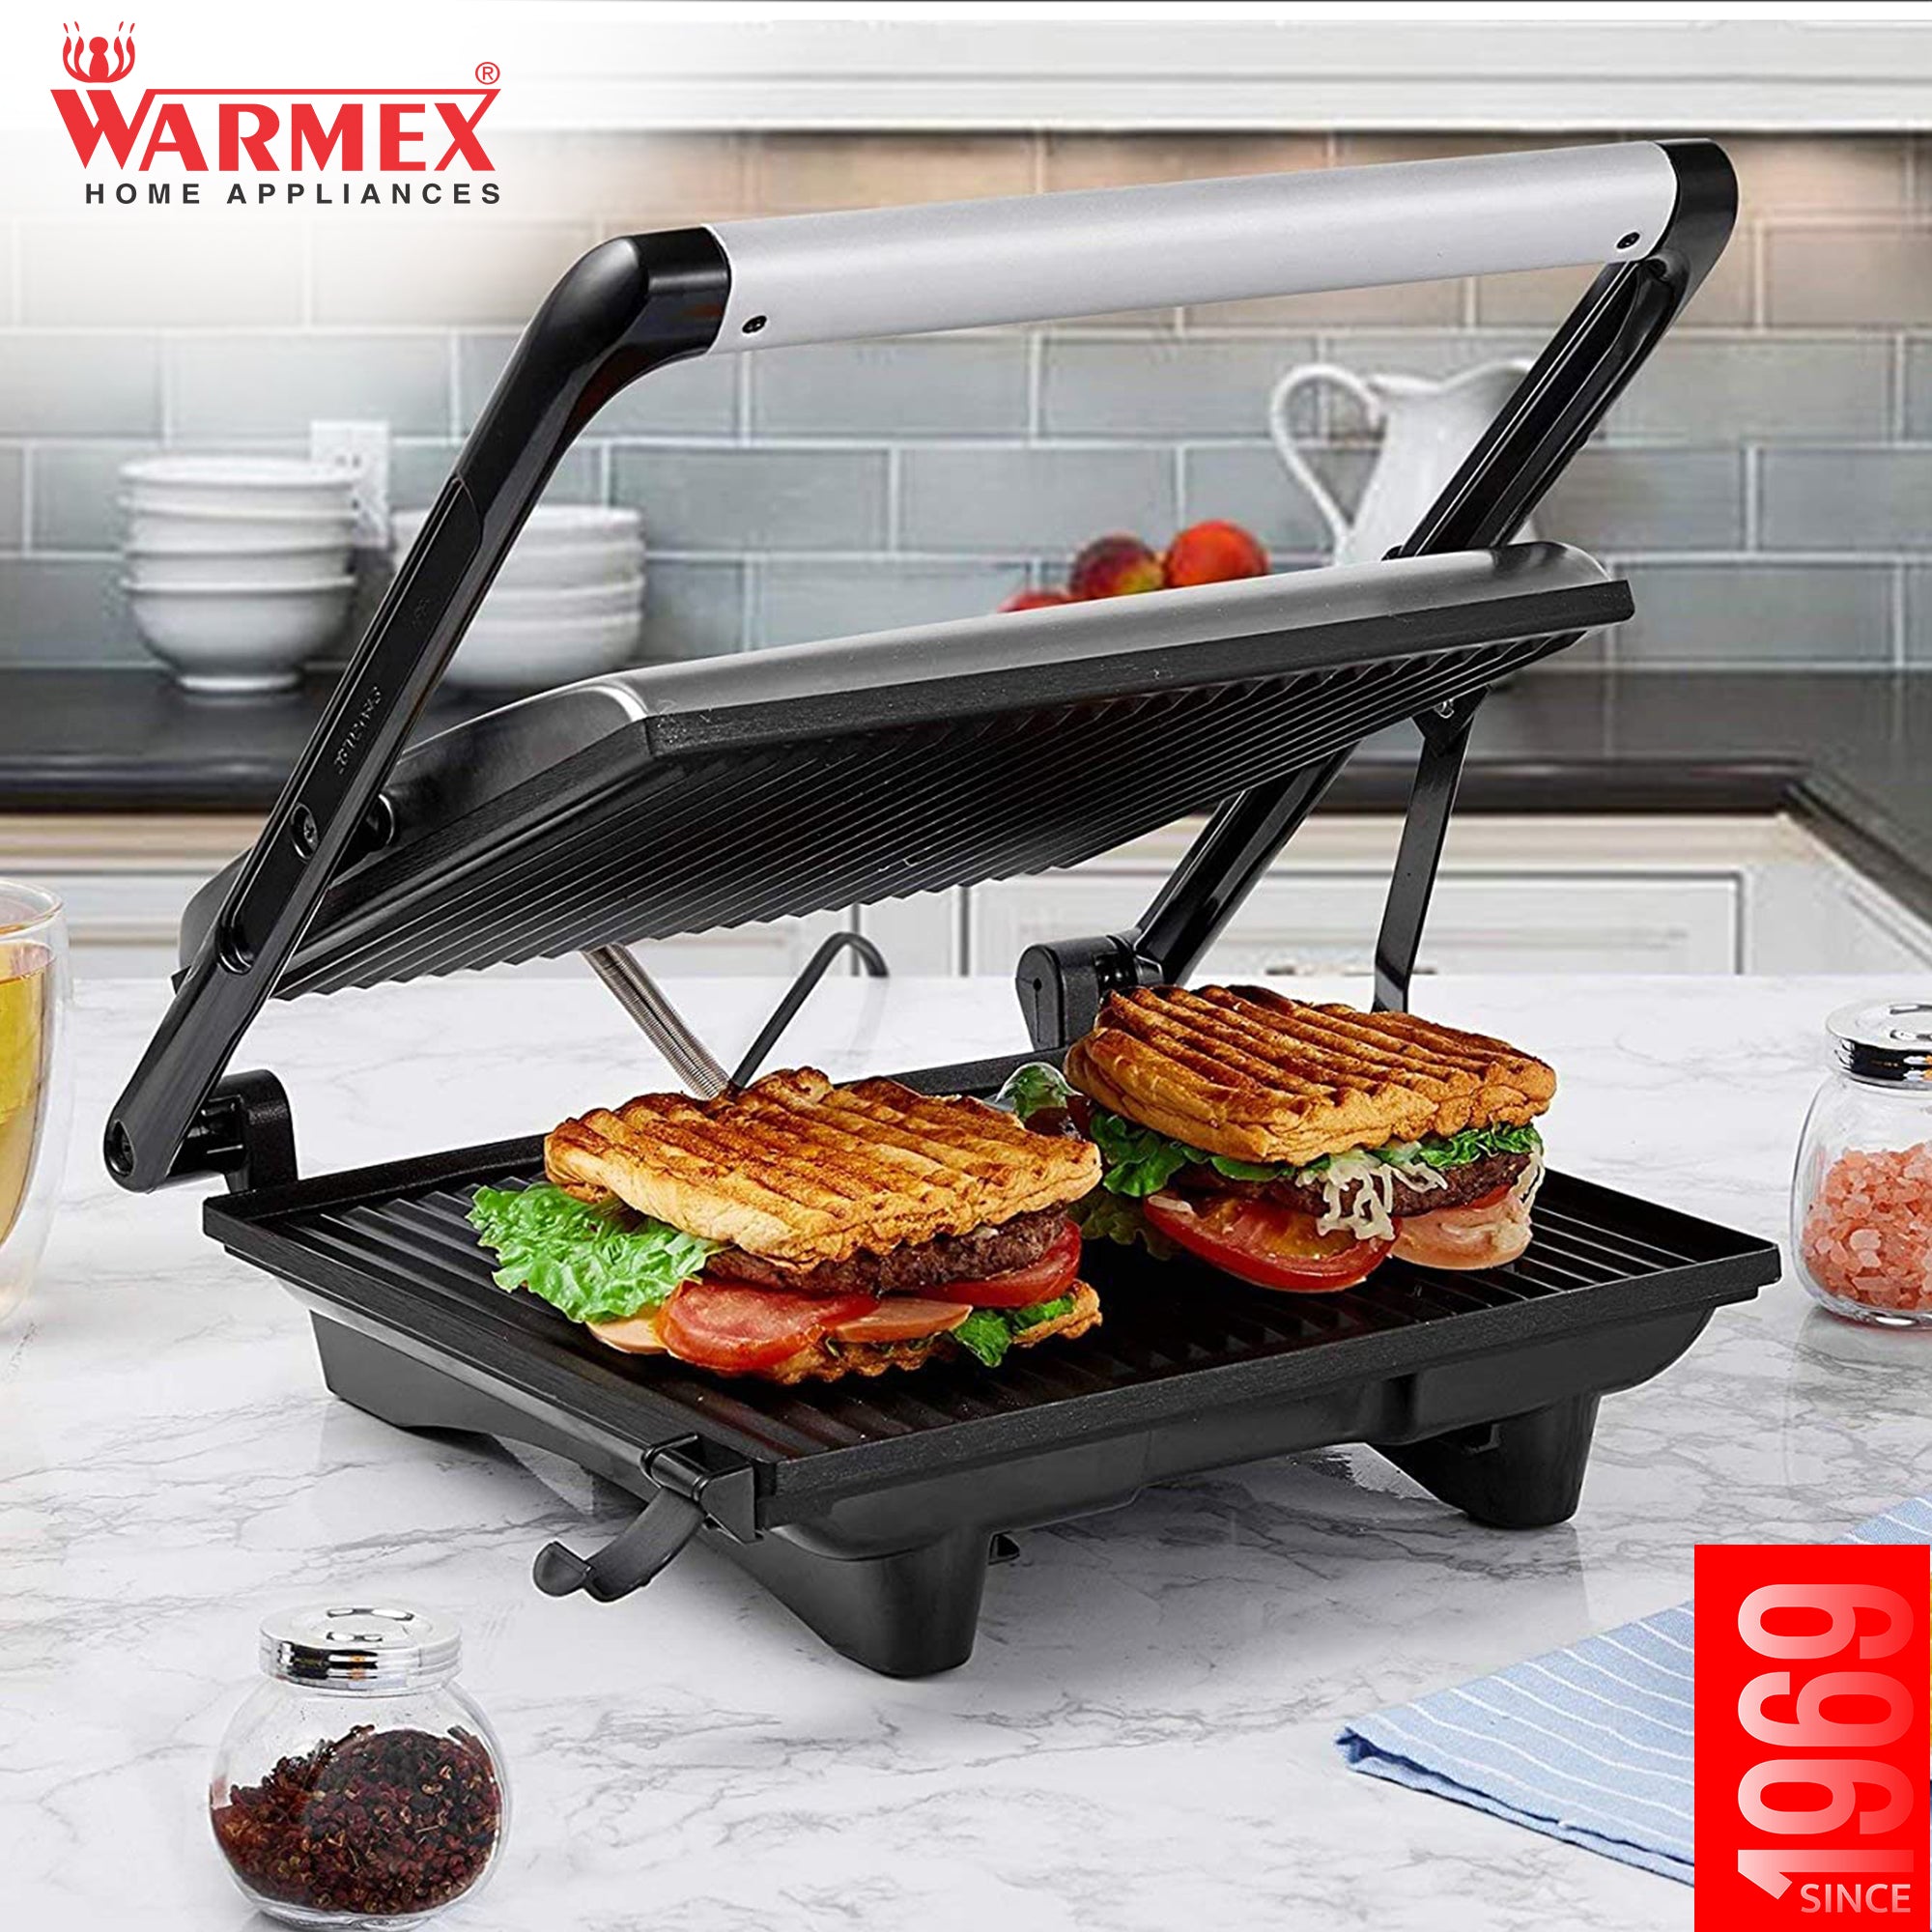 Warmex Home Appliances Grill Master with 90° Rotation warmexhomeappliances2